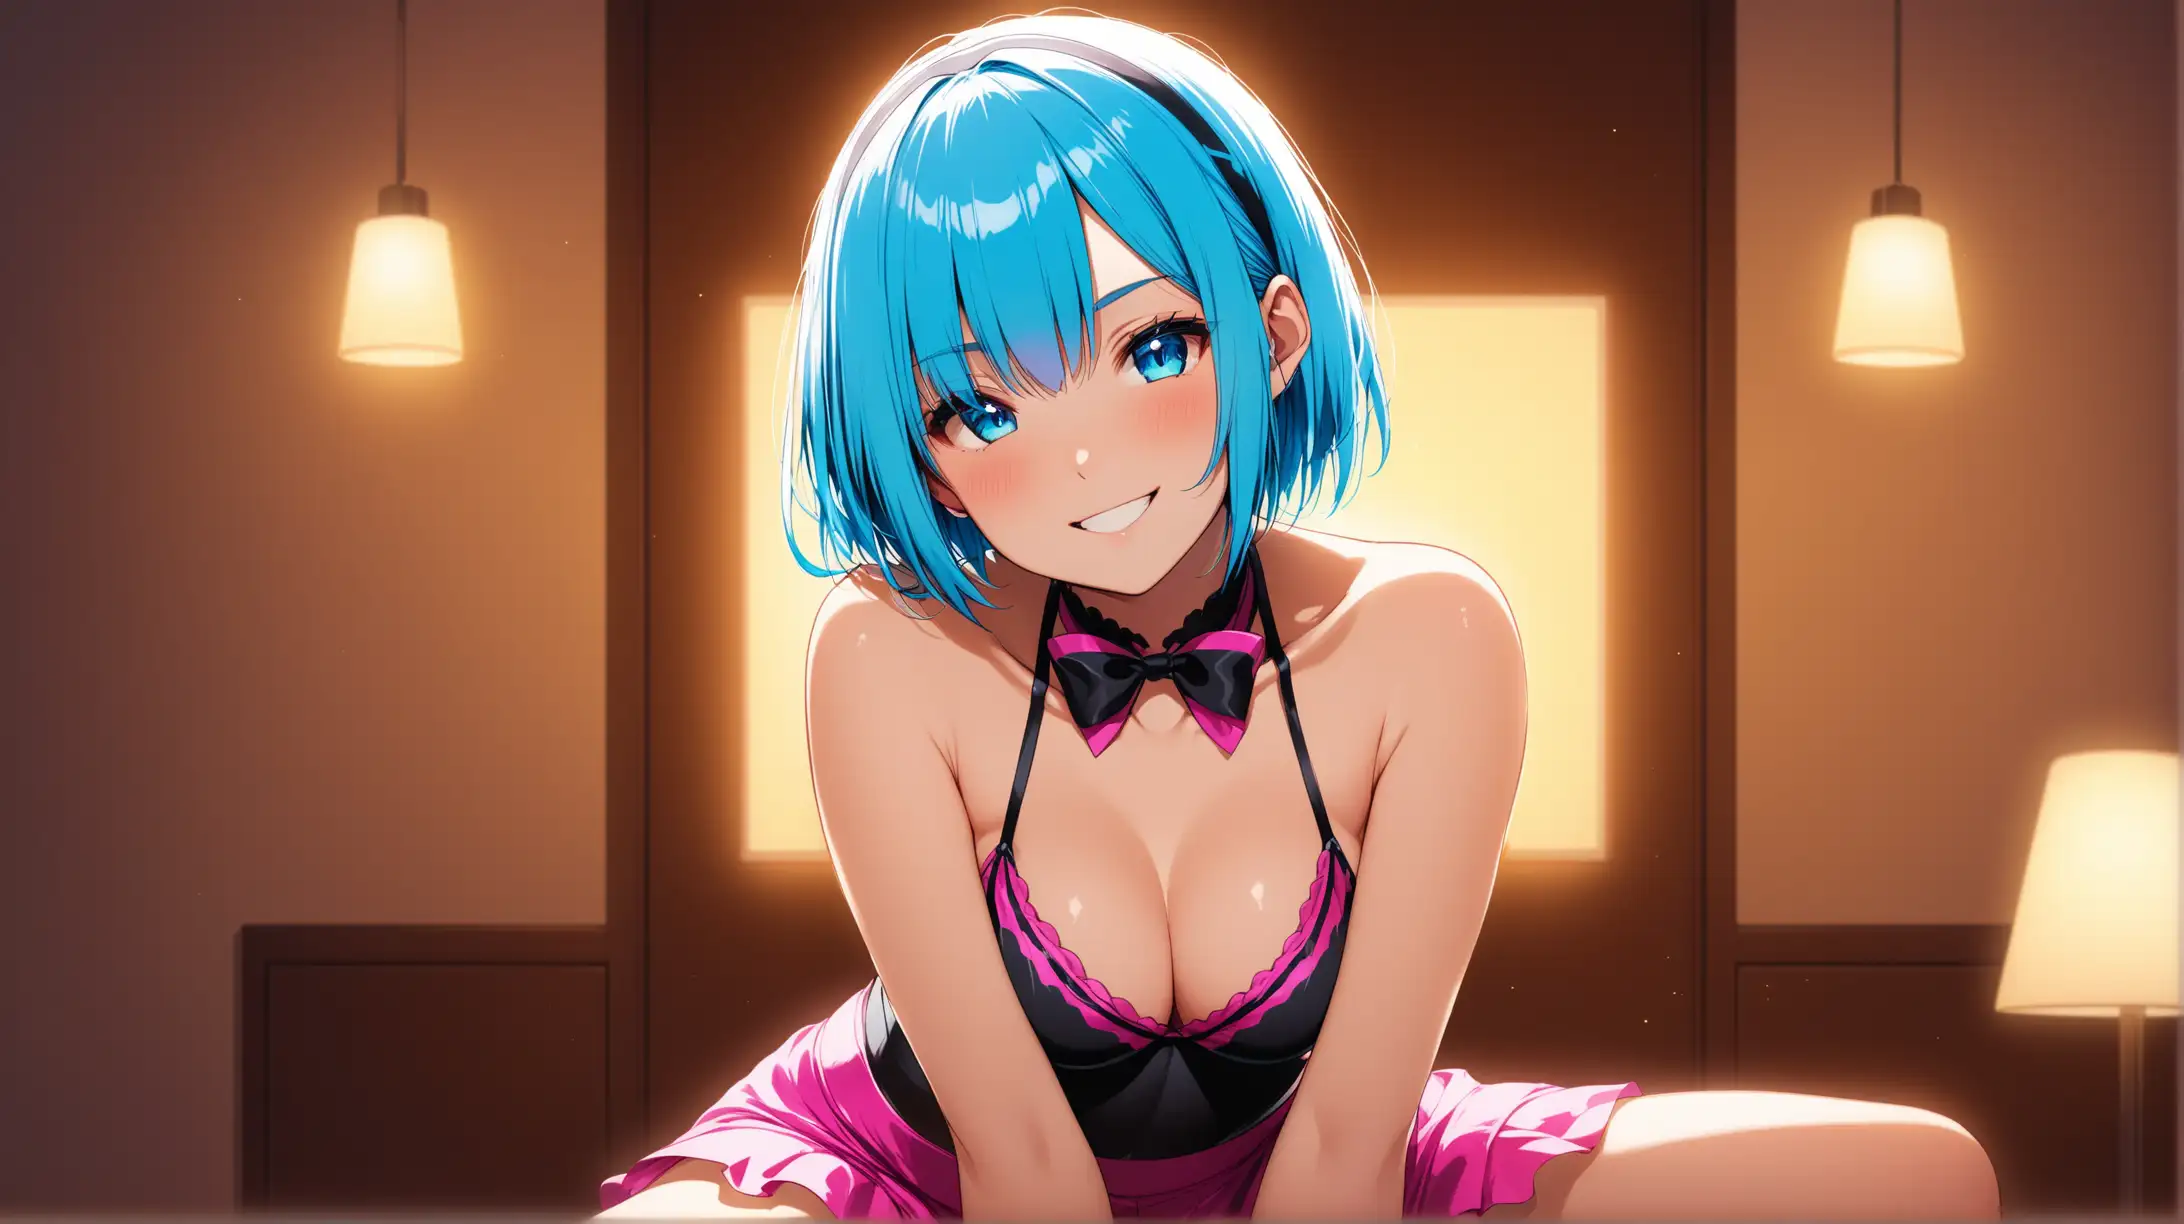 Draw the character Rem, high quality, indoors, ambient lighting, long shot, in a seductive pose, wearing a colorful outfit, smiling at the viewer